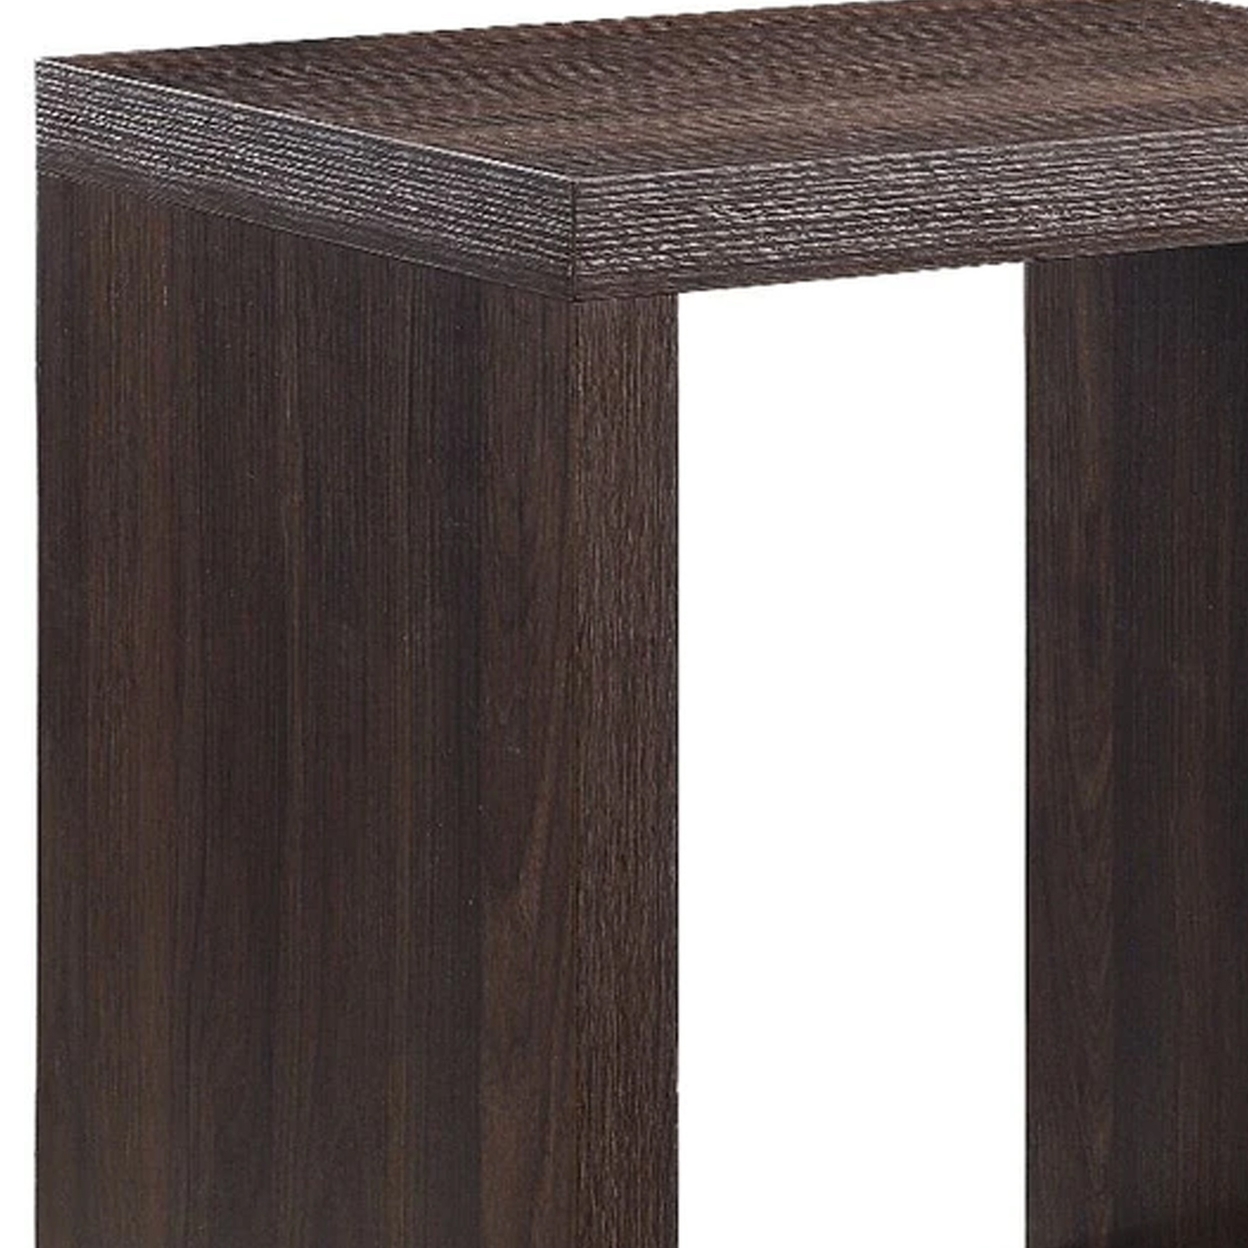 End Table With Wooden Frame And Open Shelf, Walnut Brown- Saltoro Sherpi